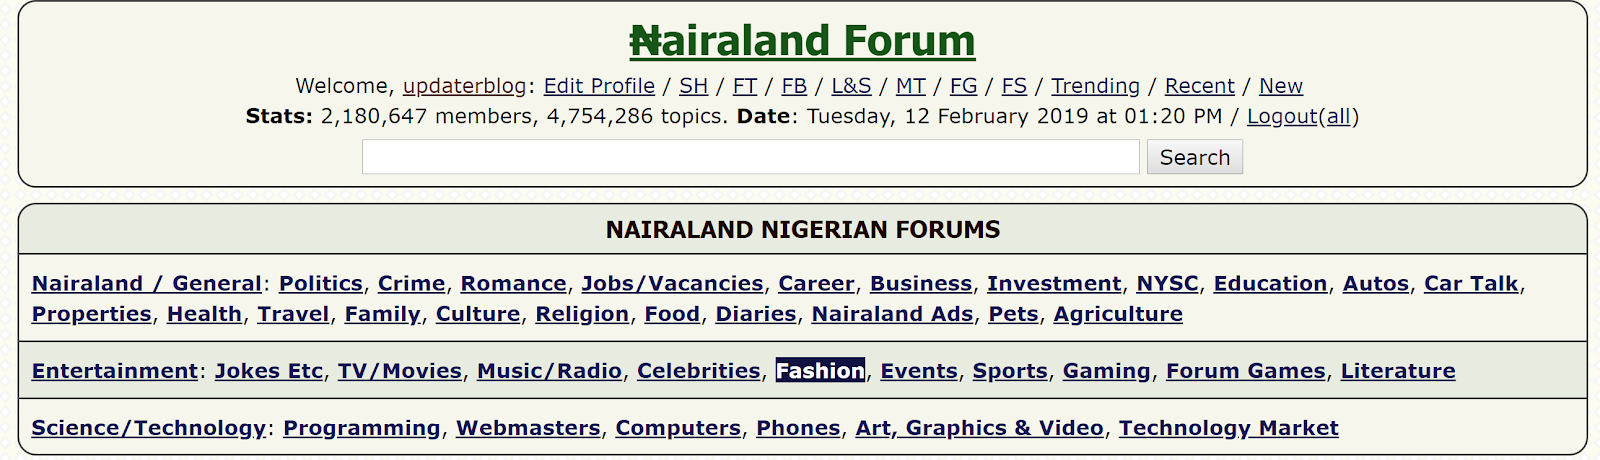 How to Post Articles and Links on Nairaland Forum 2021 Updates